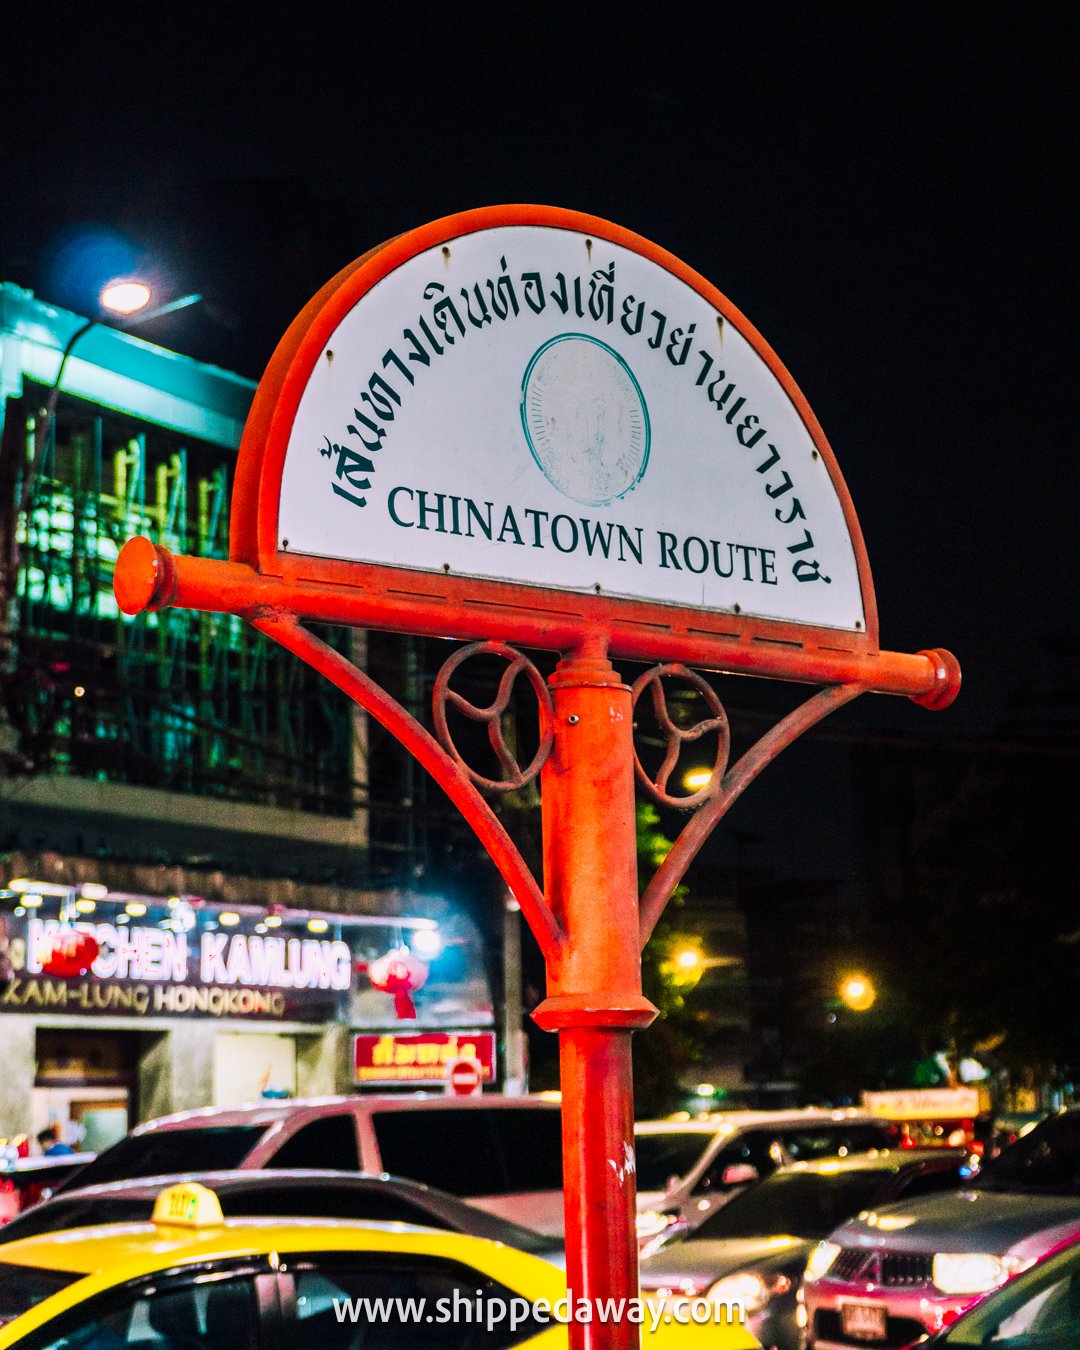 how to get to chinatown in bangkok, best way to get to chinatown in bangkok, chinatown bangkok guide